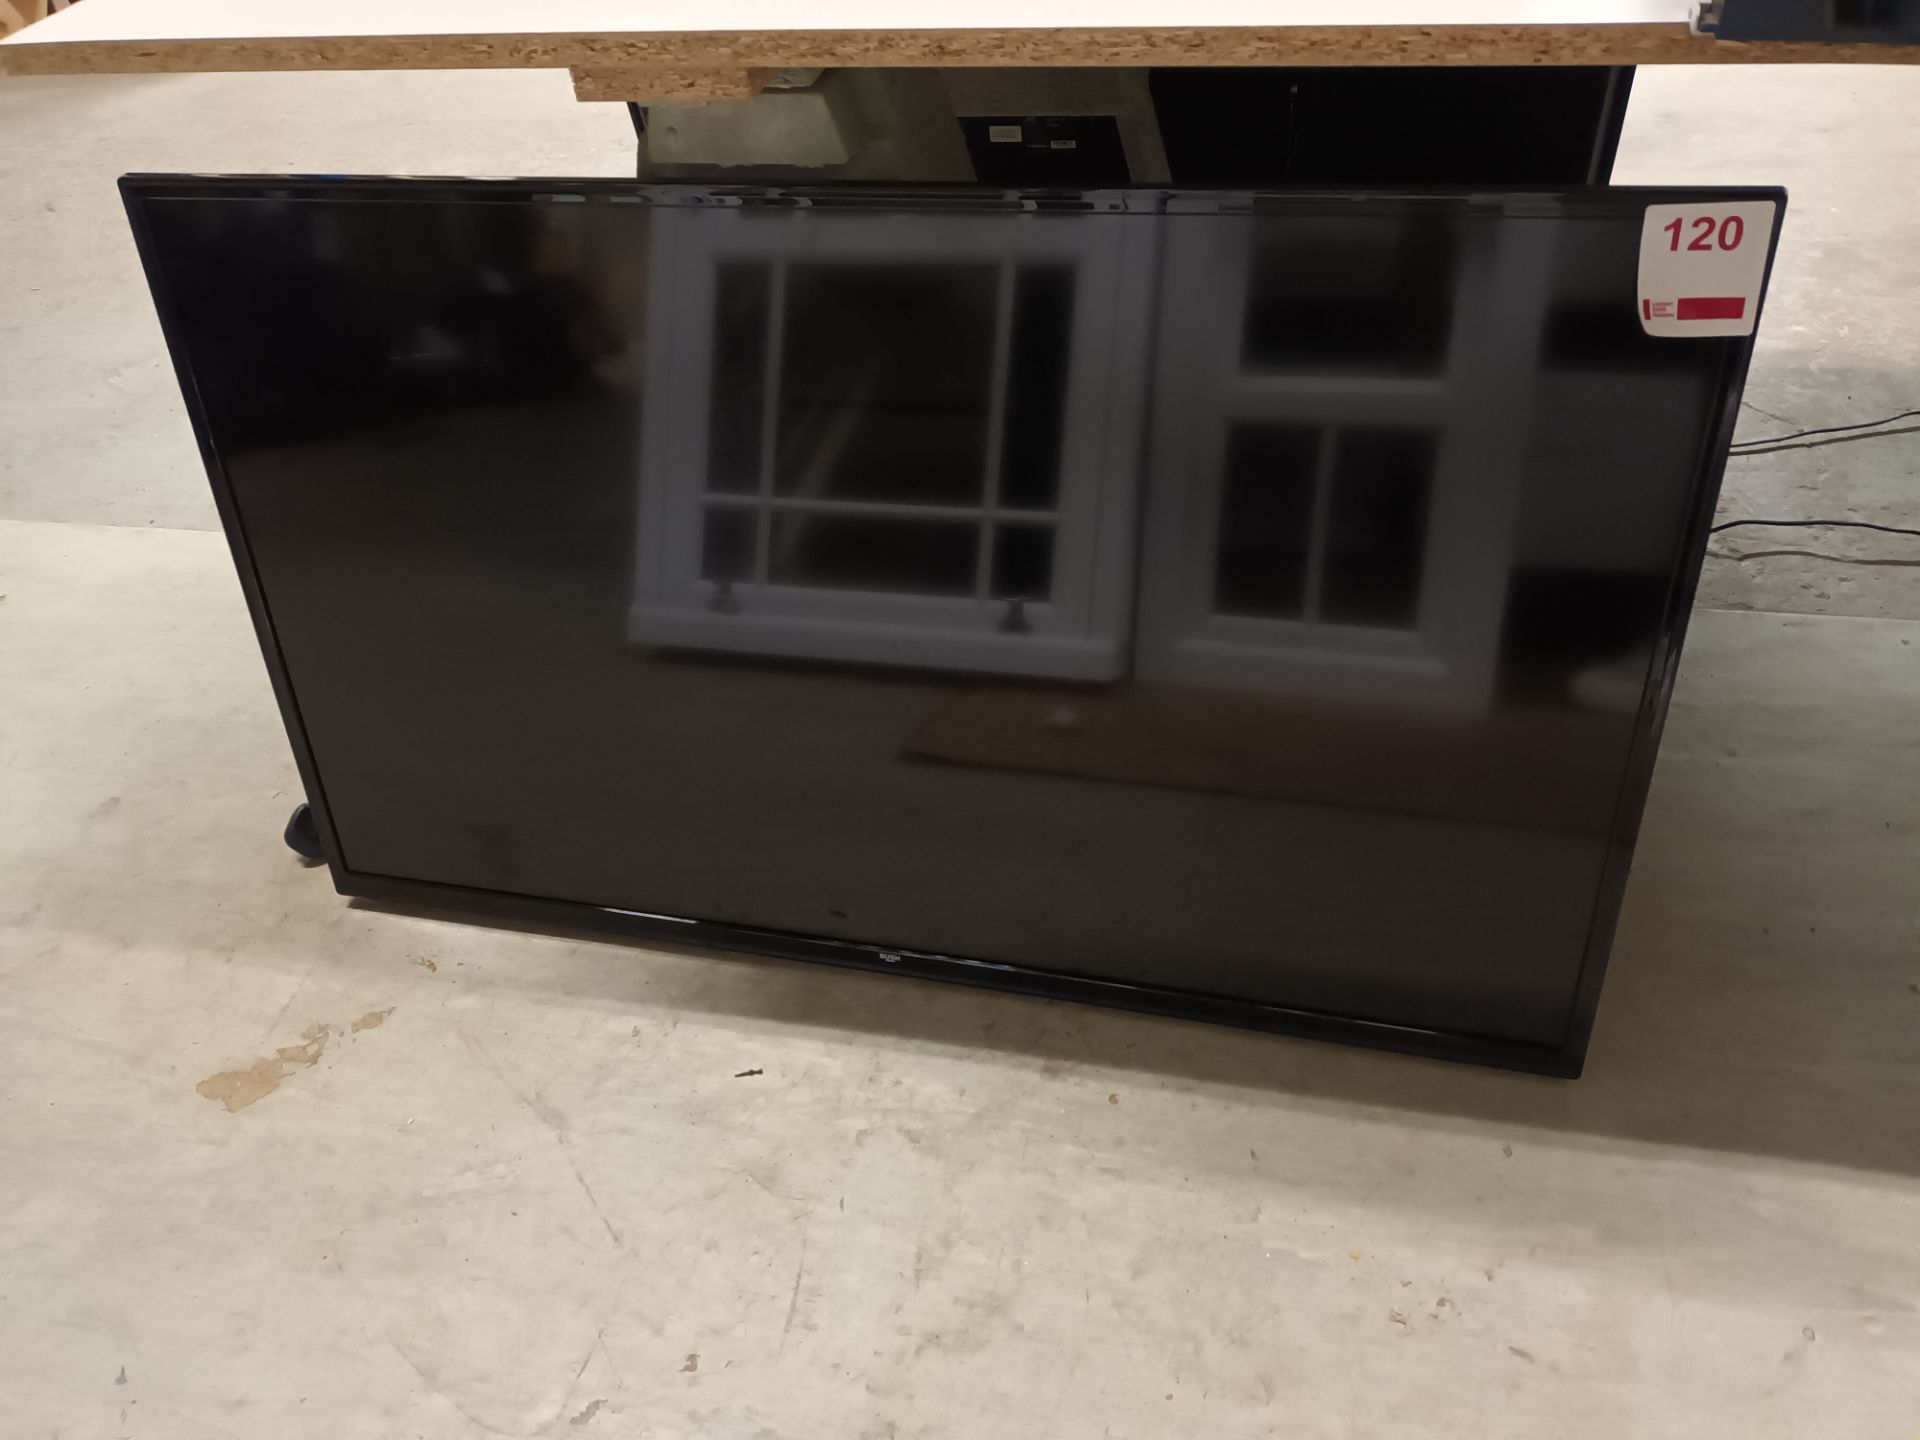 Bush DLED48287FHD 48" TV (no stand)